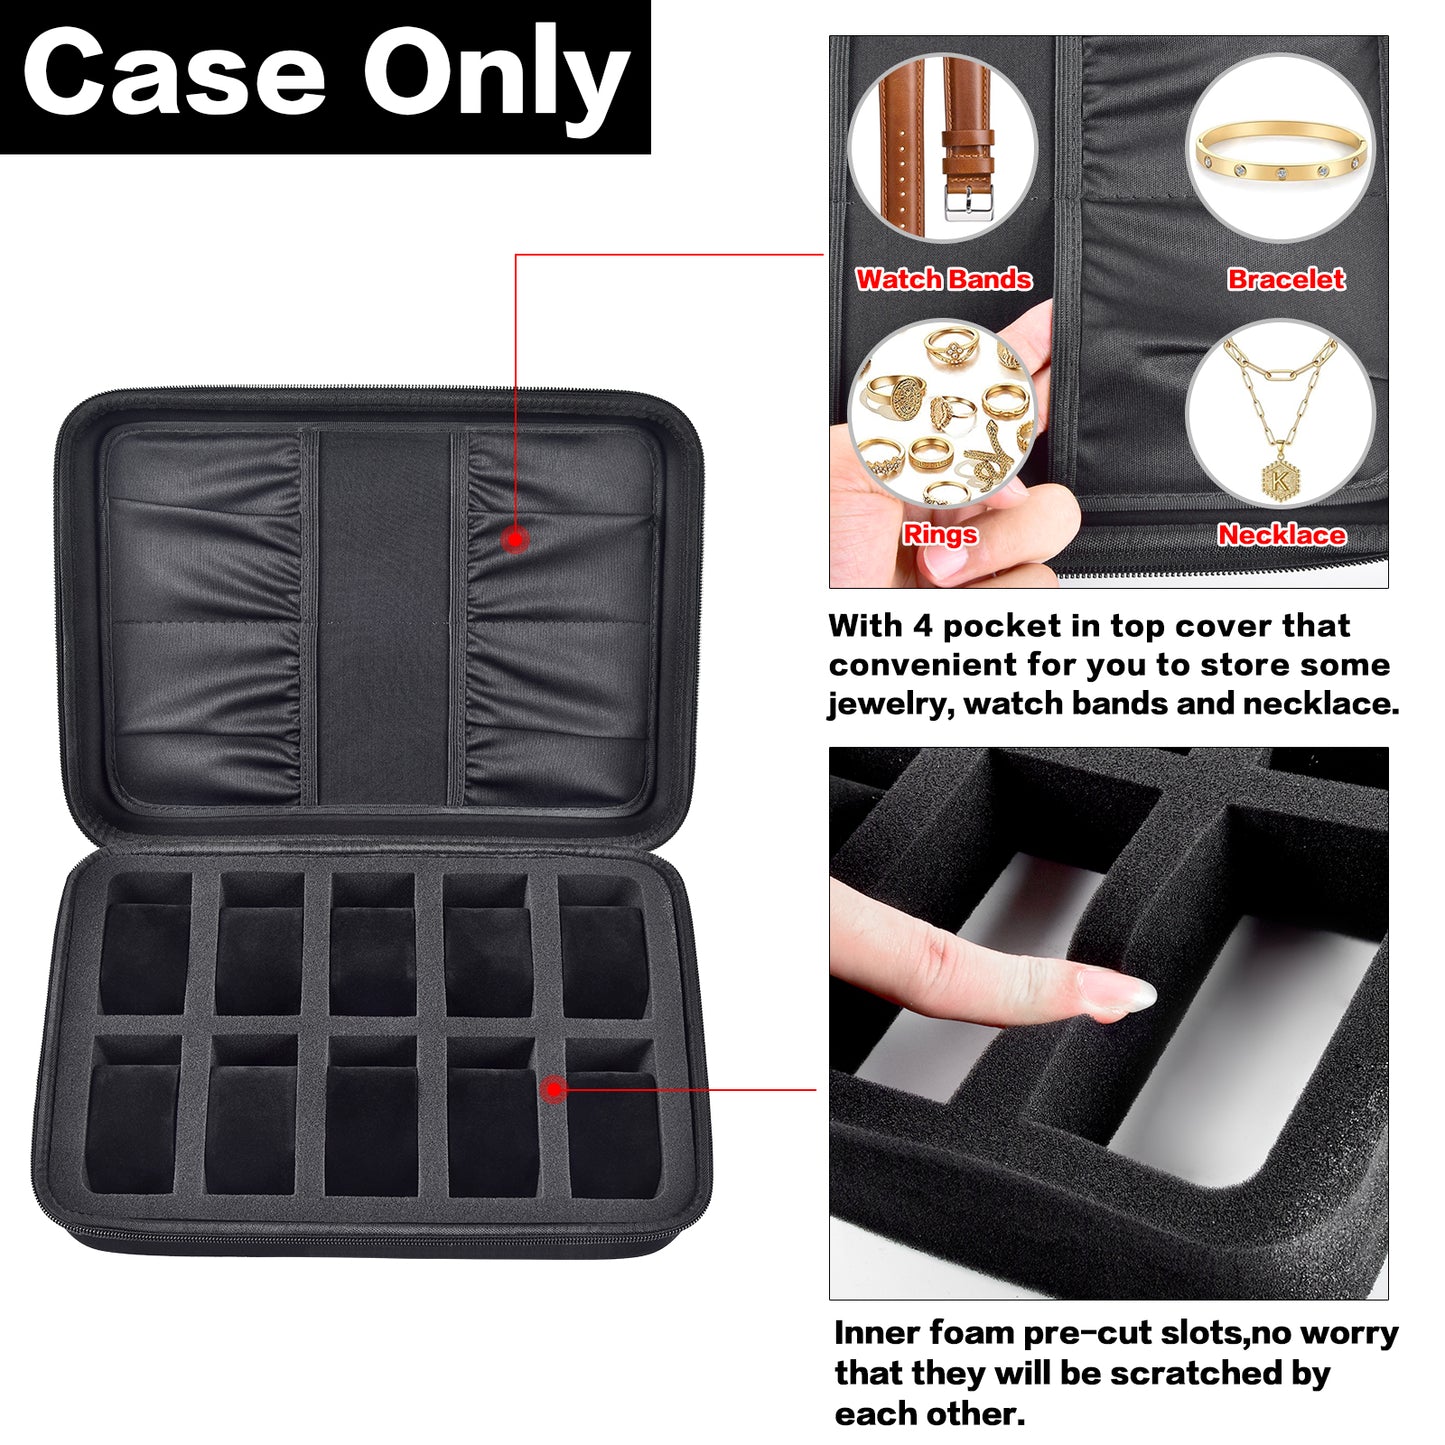 Watch Box Organizer Case, 10 Slots Men Women Display Holder Storage Stand Roll for All Wristwatches, Digital Sports, Smartwatches 42mm, Accessories Pocket for Watch Bands, Cufflink, Jewelry (Bag Only)